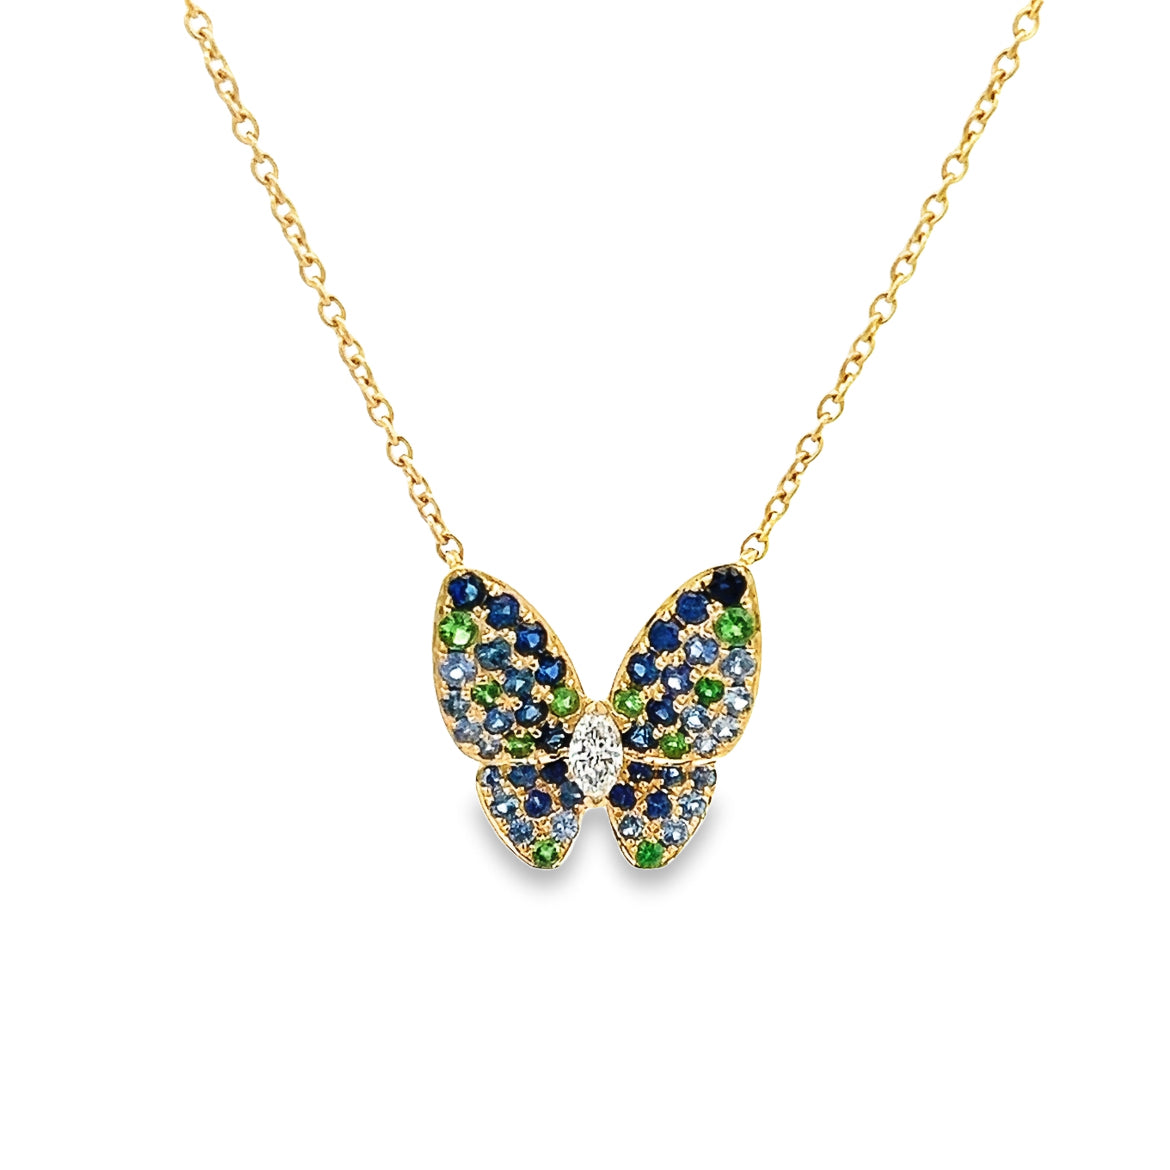 18K GOLD BUTTERFLY NECKLACE WITH GREEN GARNET AND BLUE SAPPHIRE